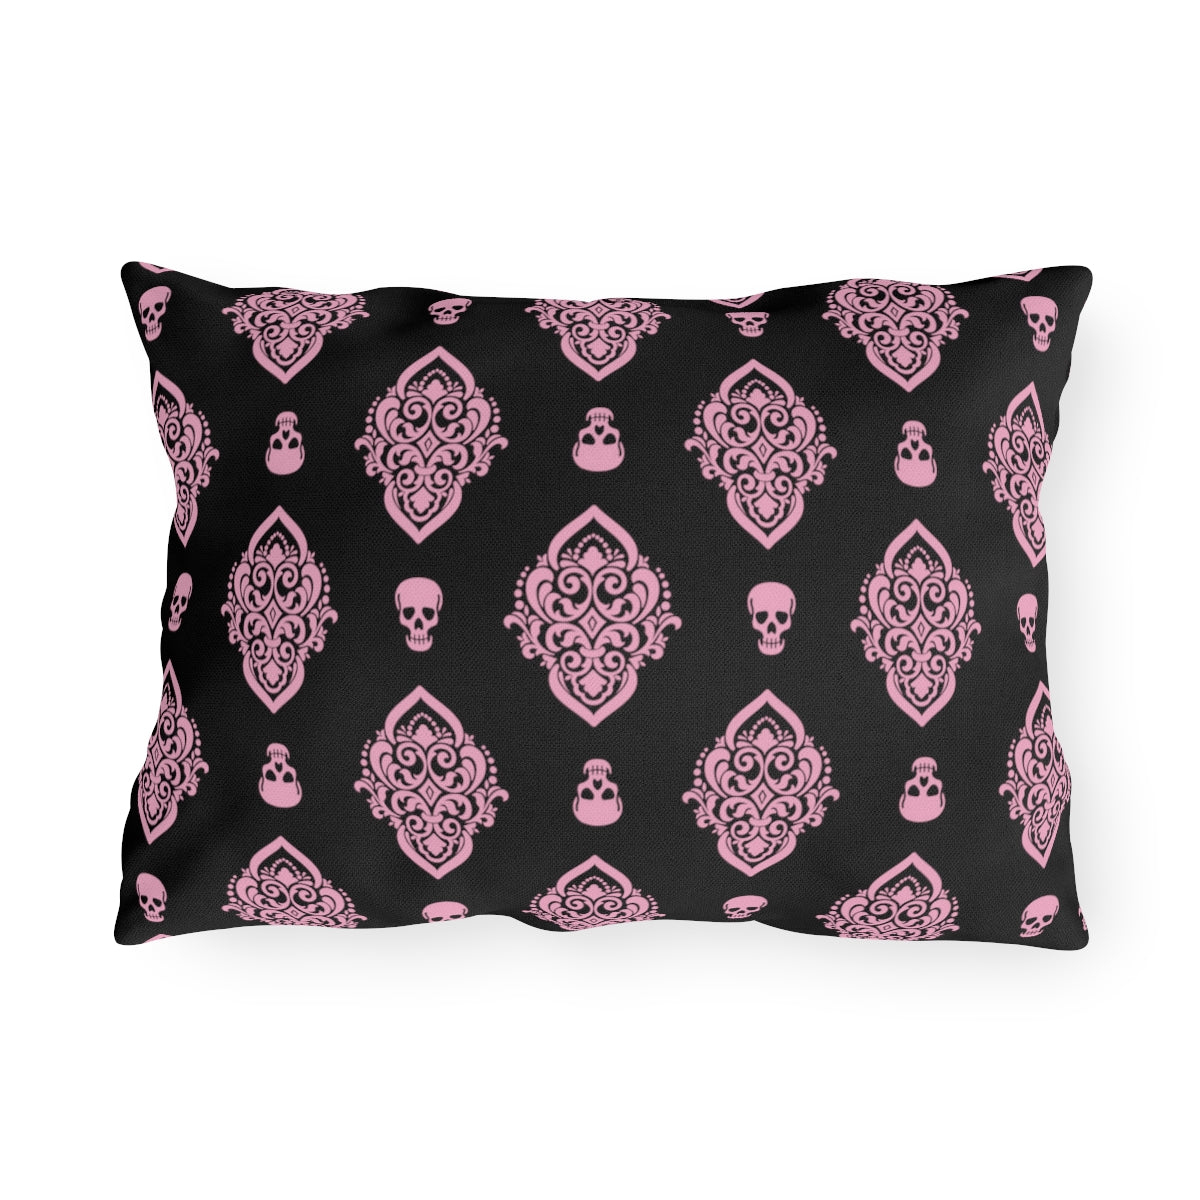 Pink and Black Skull Damask Outdoor Pillows